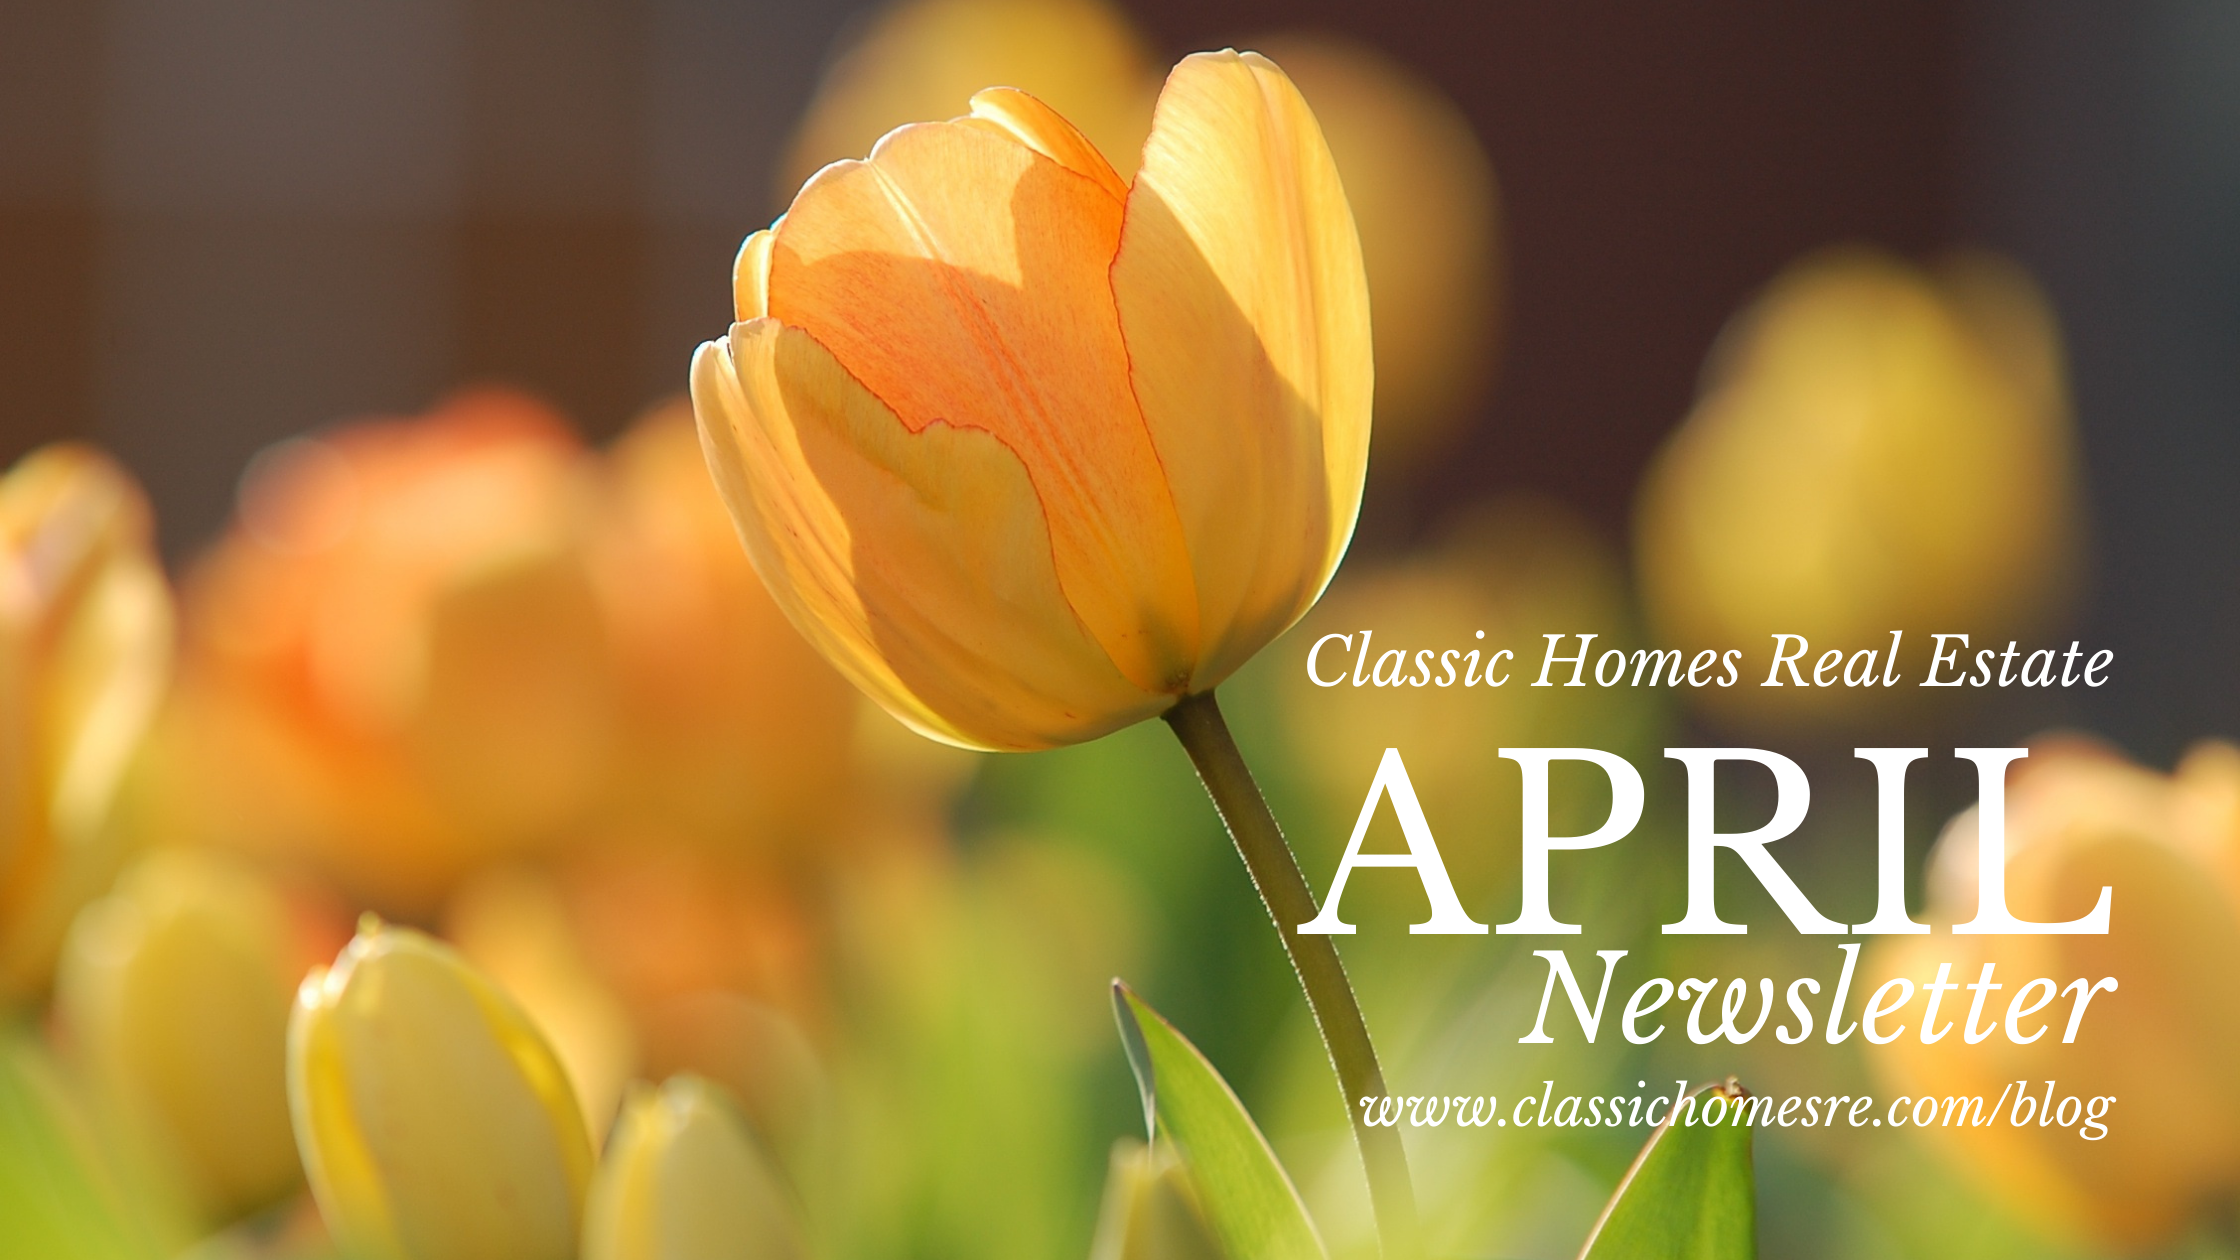 Classic Homes Real Estate Newsletter - Month of April